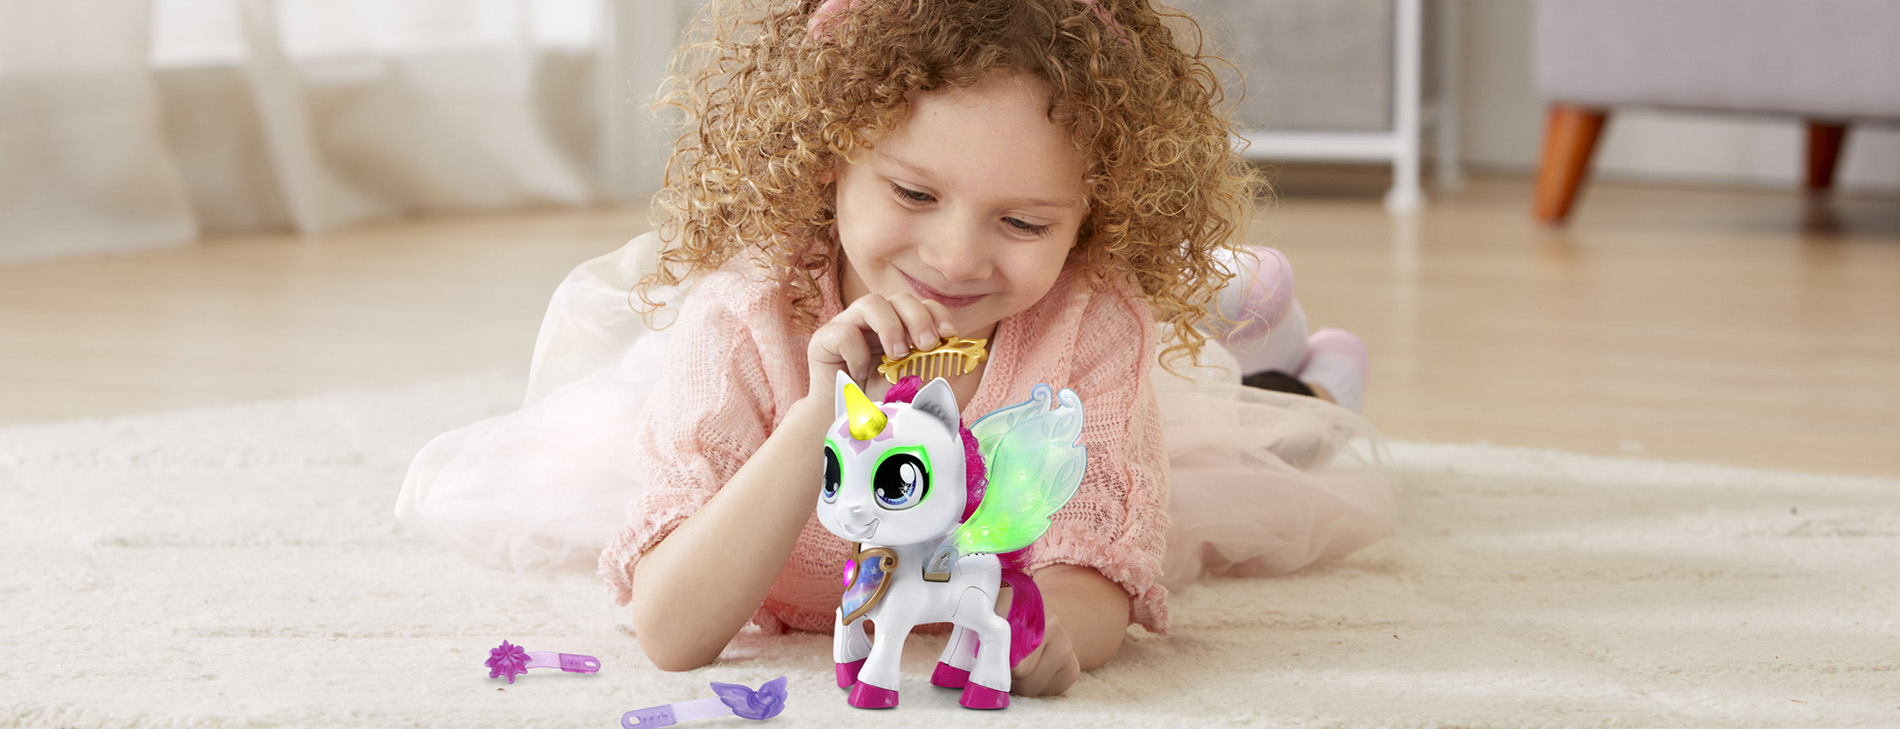 Little girl playing with a unicorn.